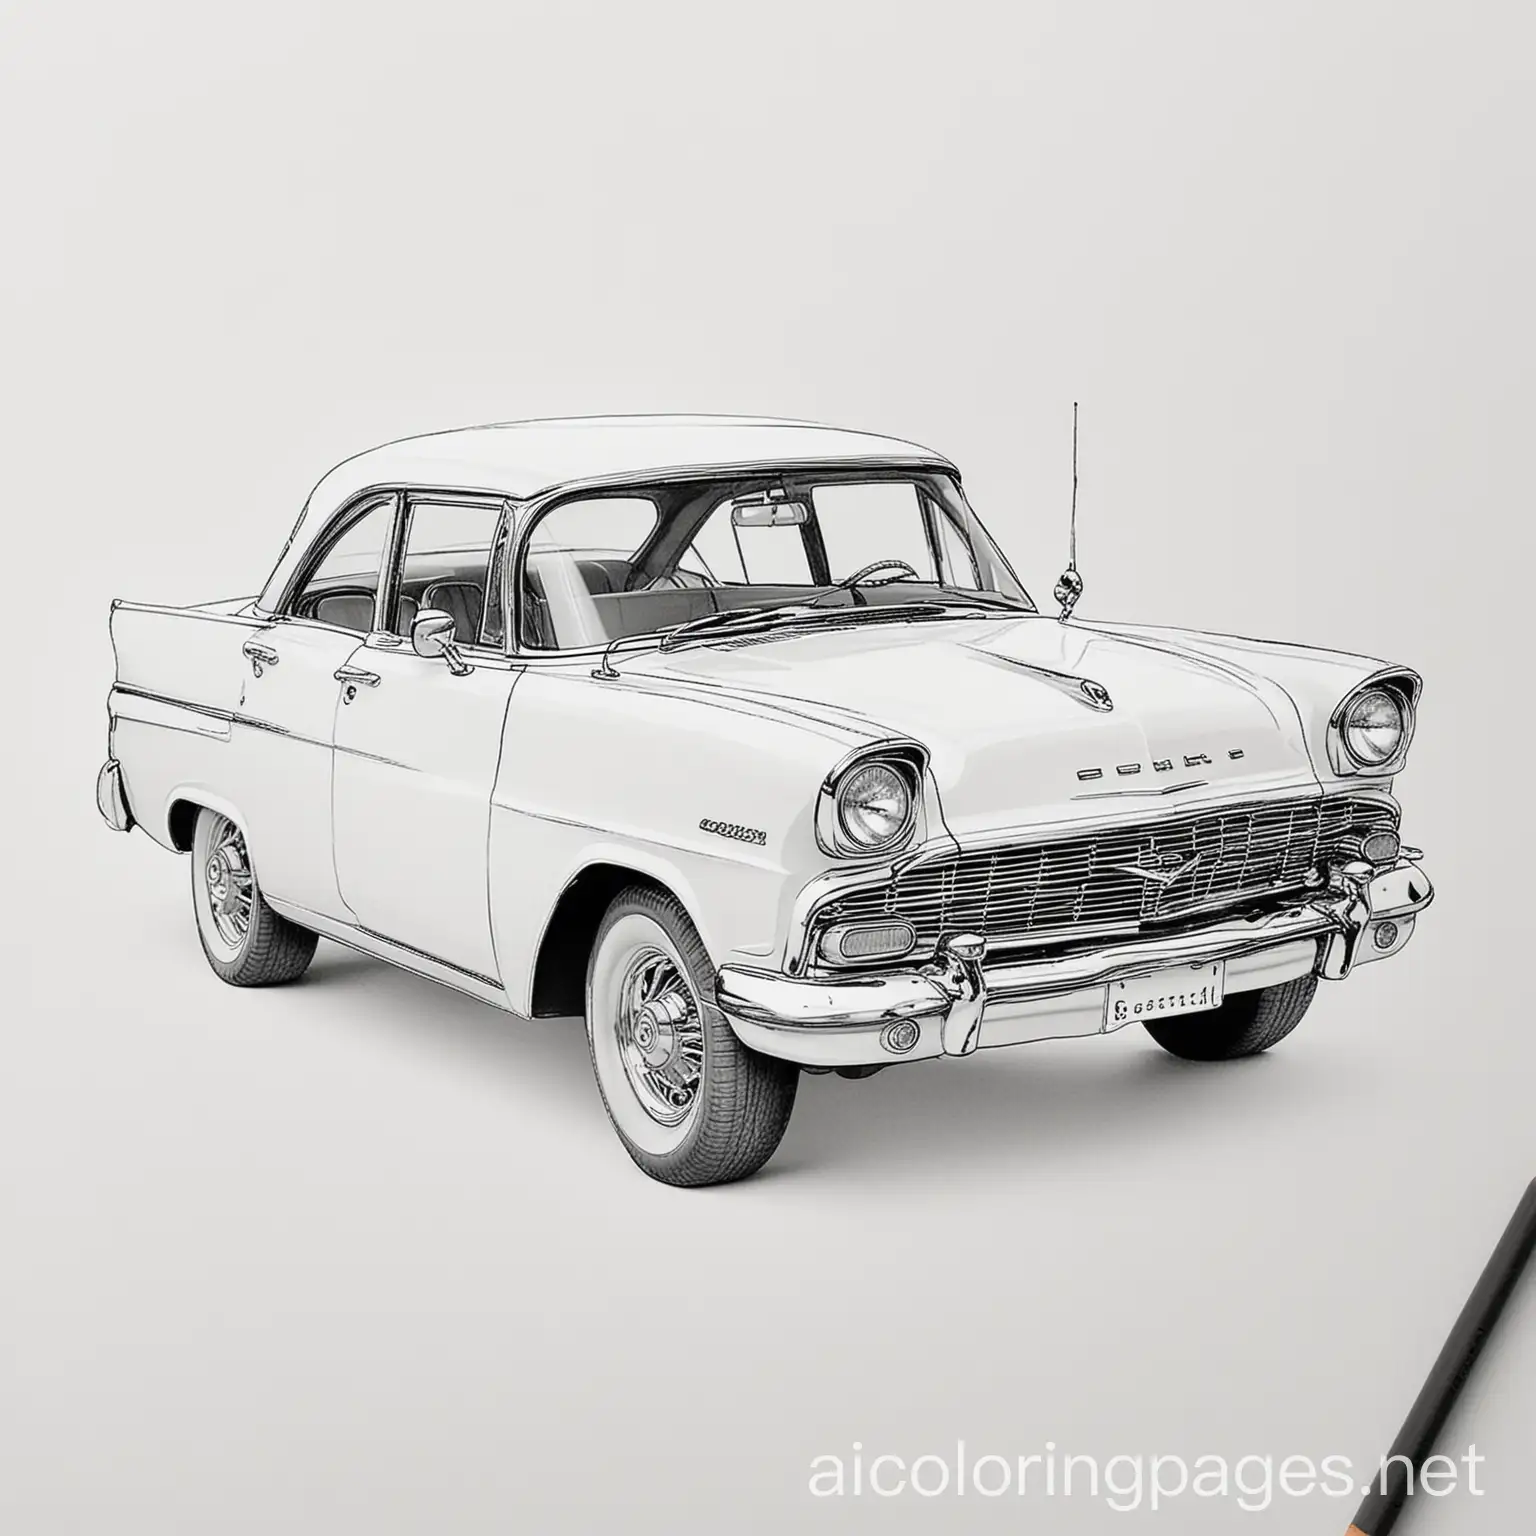 Simple-Black-and-White-Car-Coloring-Page-with-Ample-White-Space